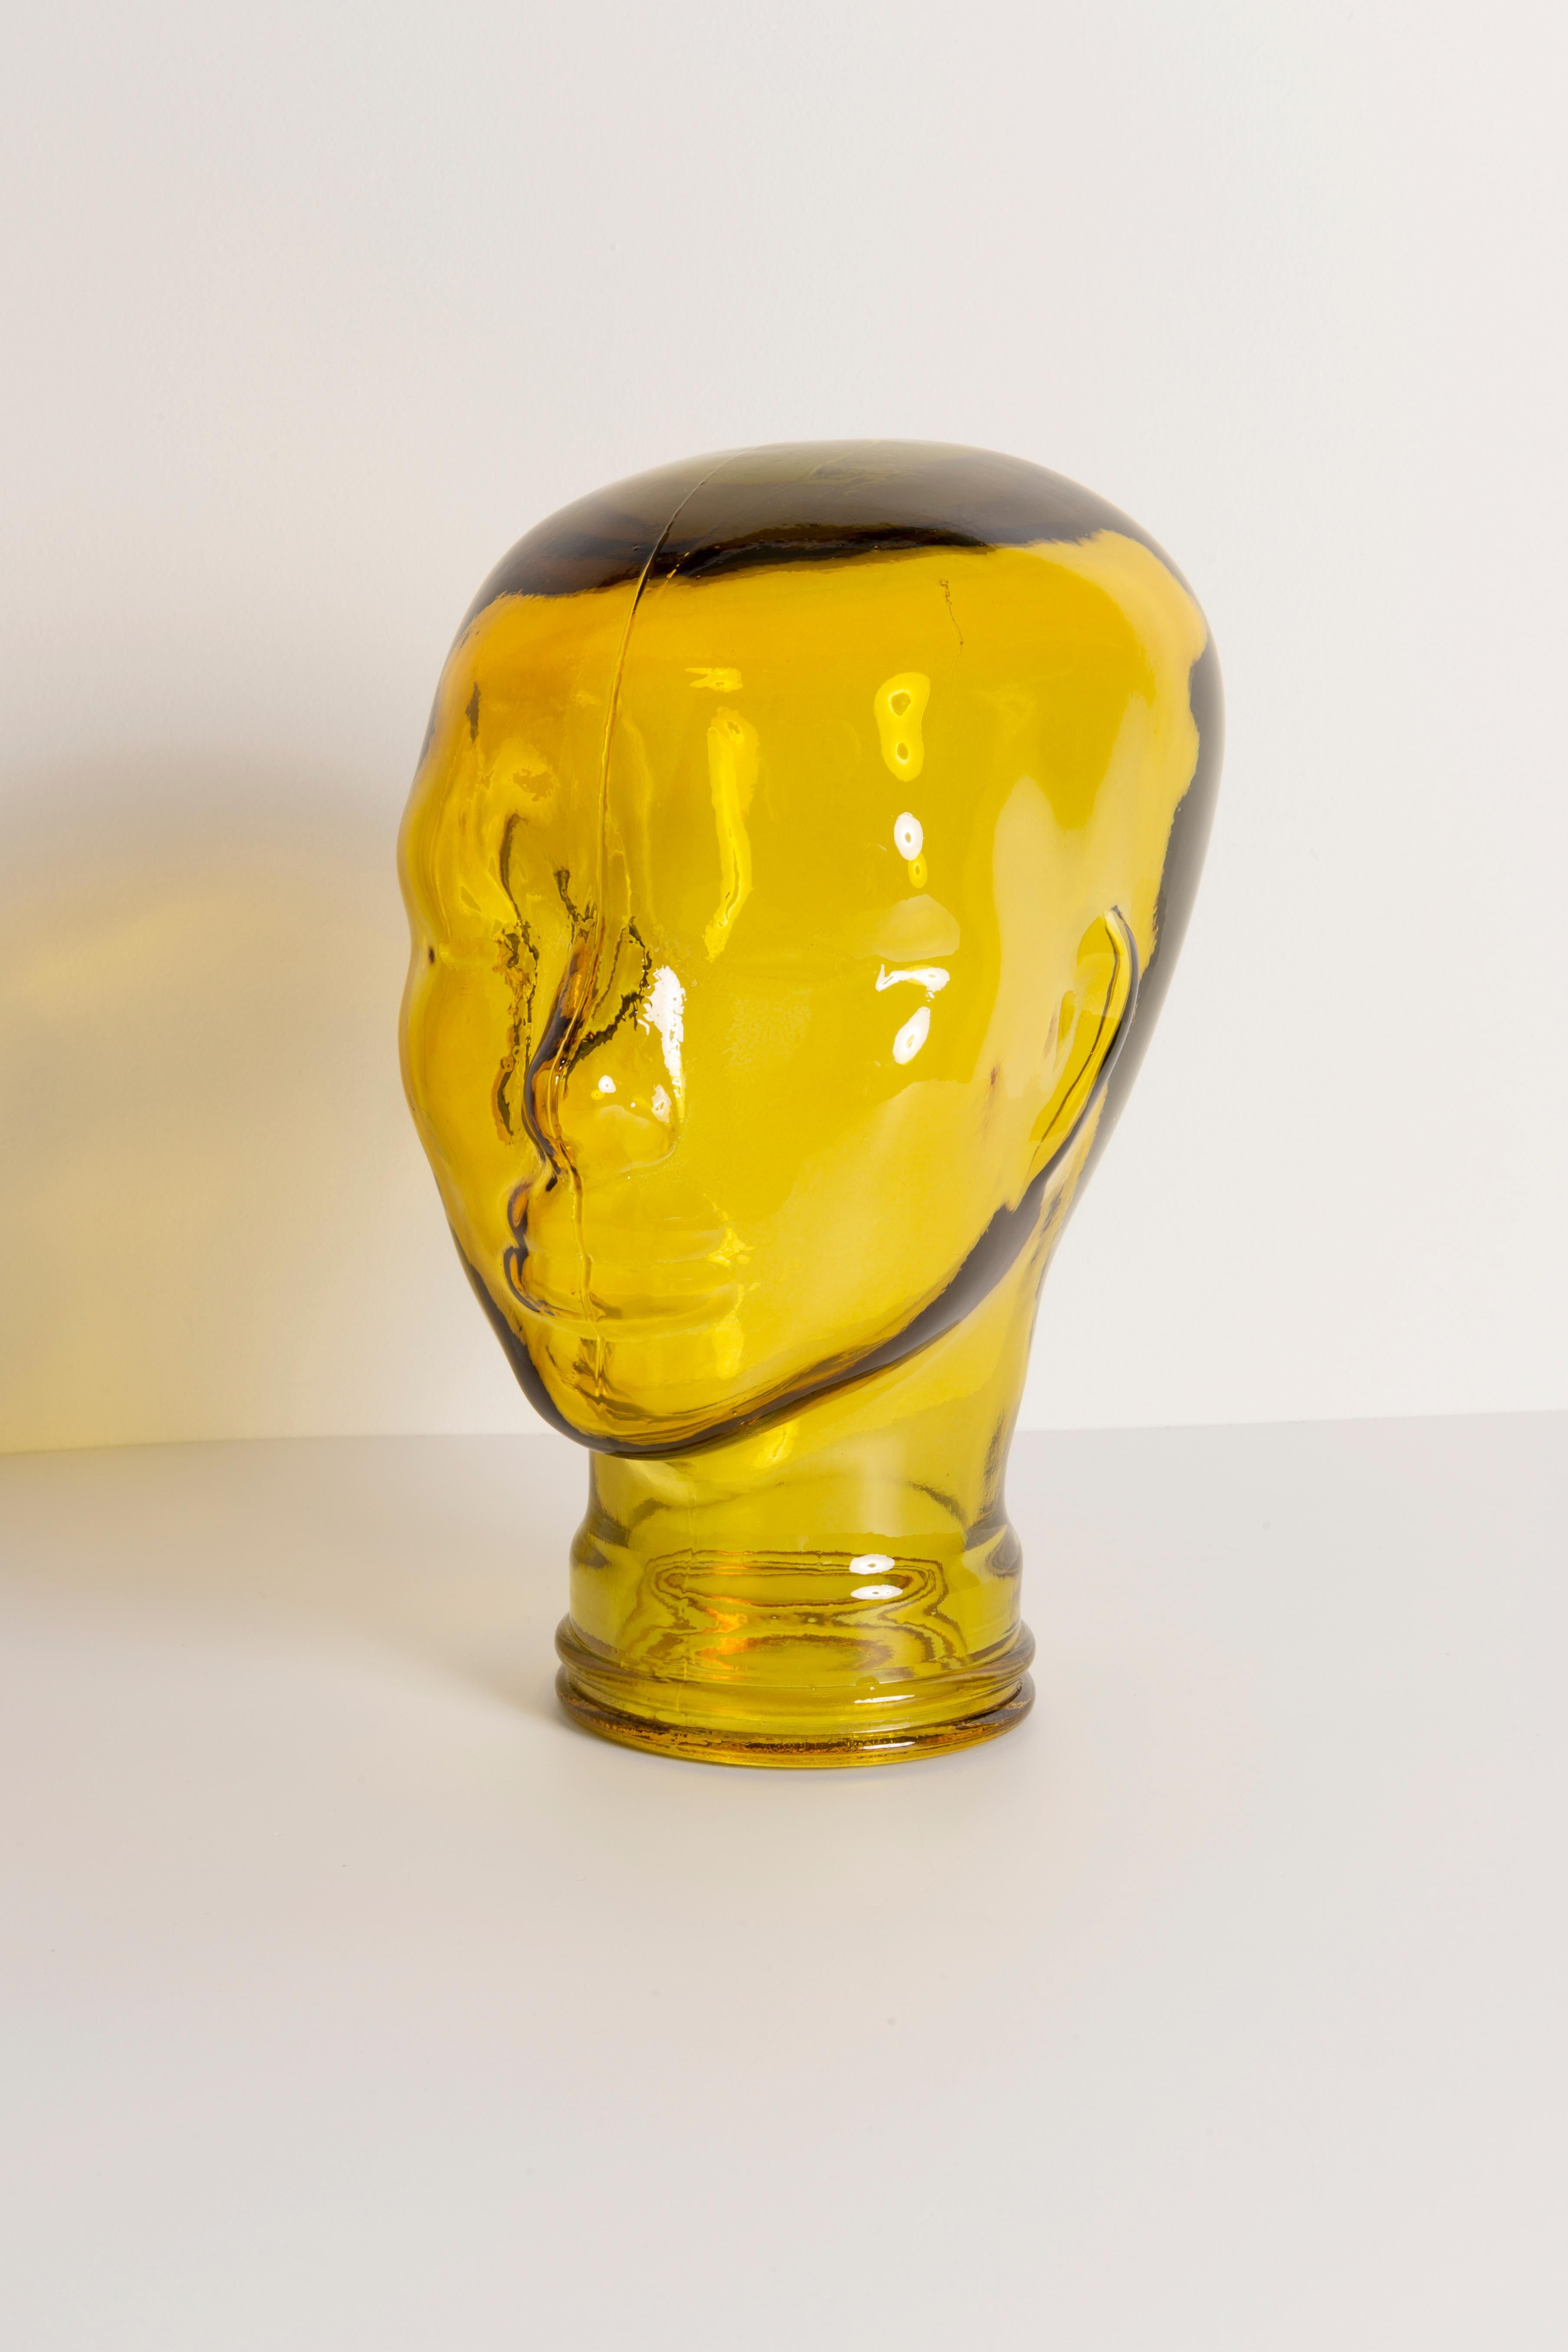 Yellow Vintage Decorative Mannequin Glass Head Sculpture, 1970s, Germany For Sale 4